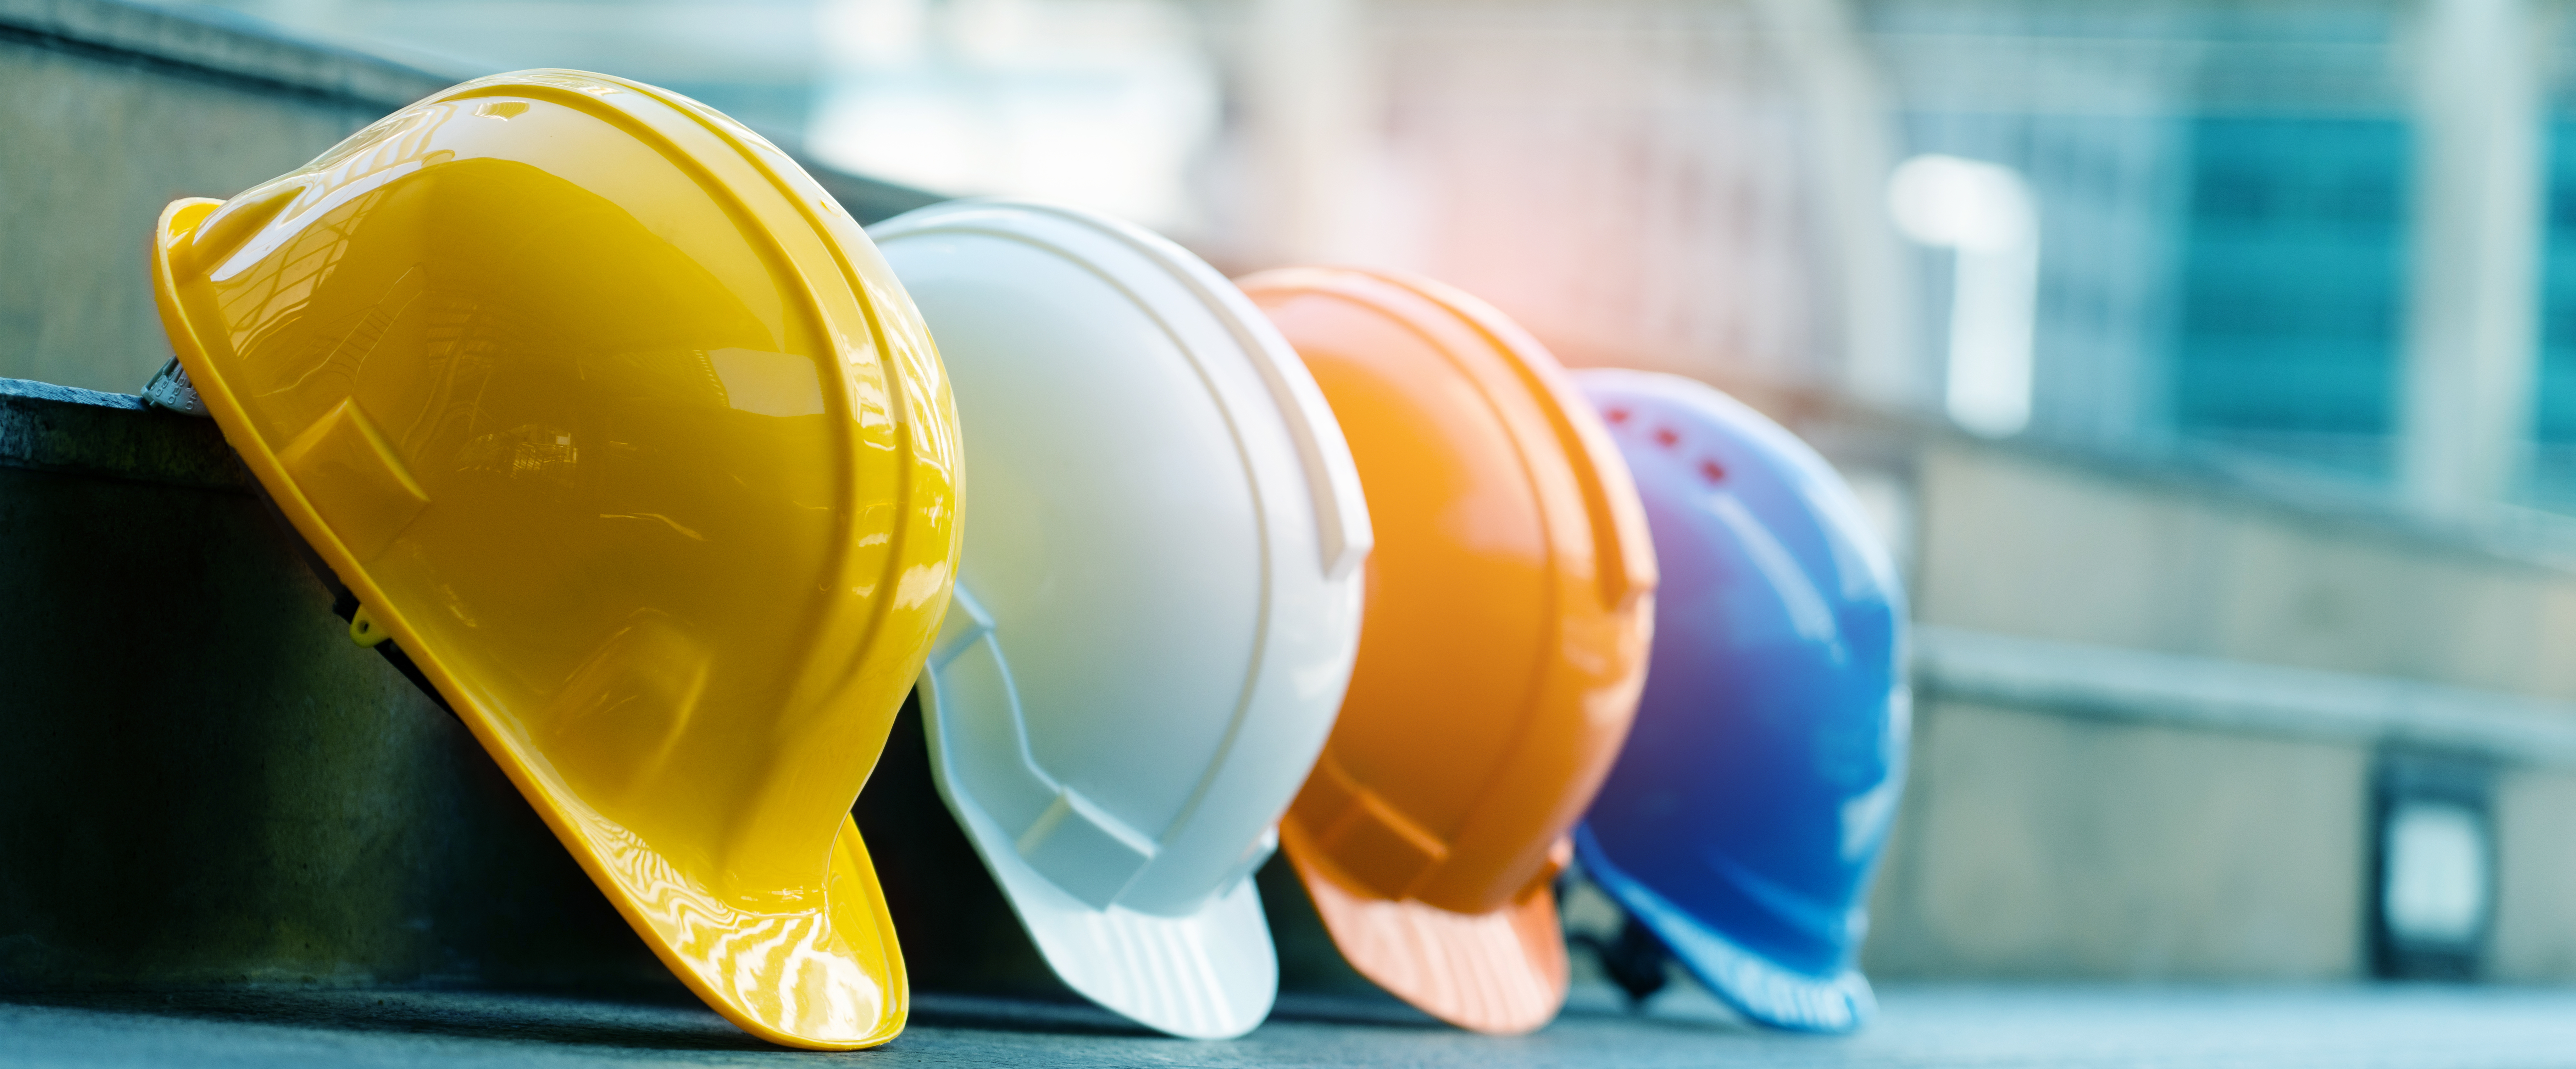 A yellow safety hard hat is leaning against a ledge next to three other safety hard hats, each in their own color of white, orange, and lastly, blue.